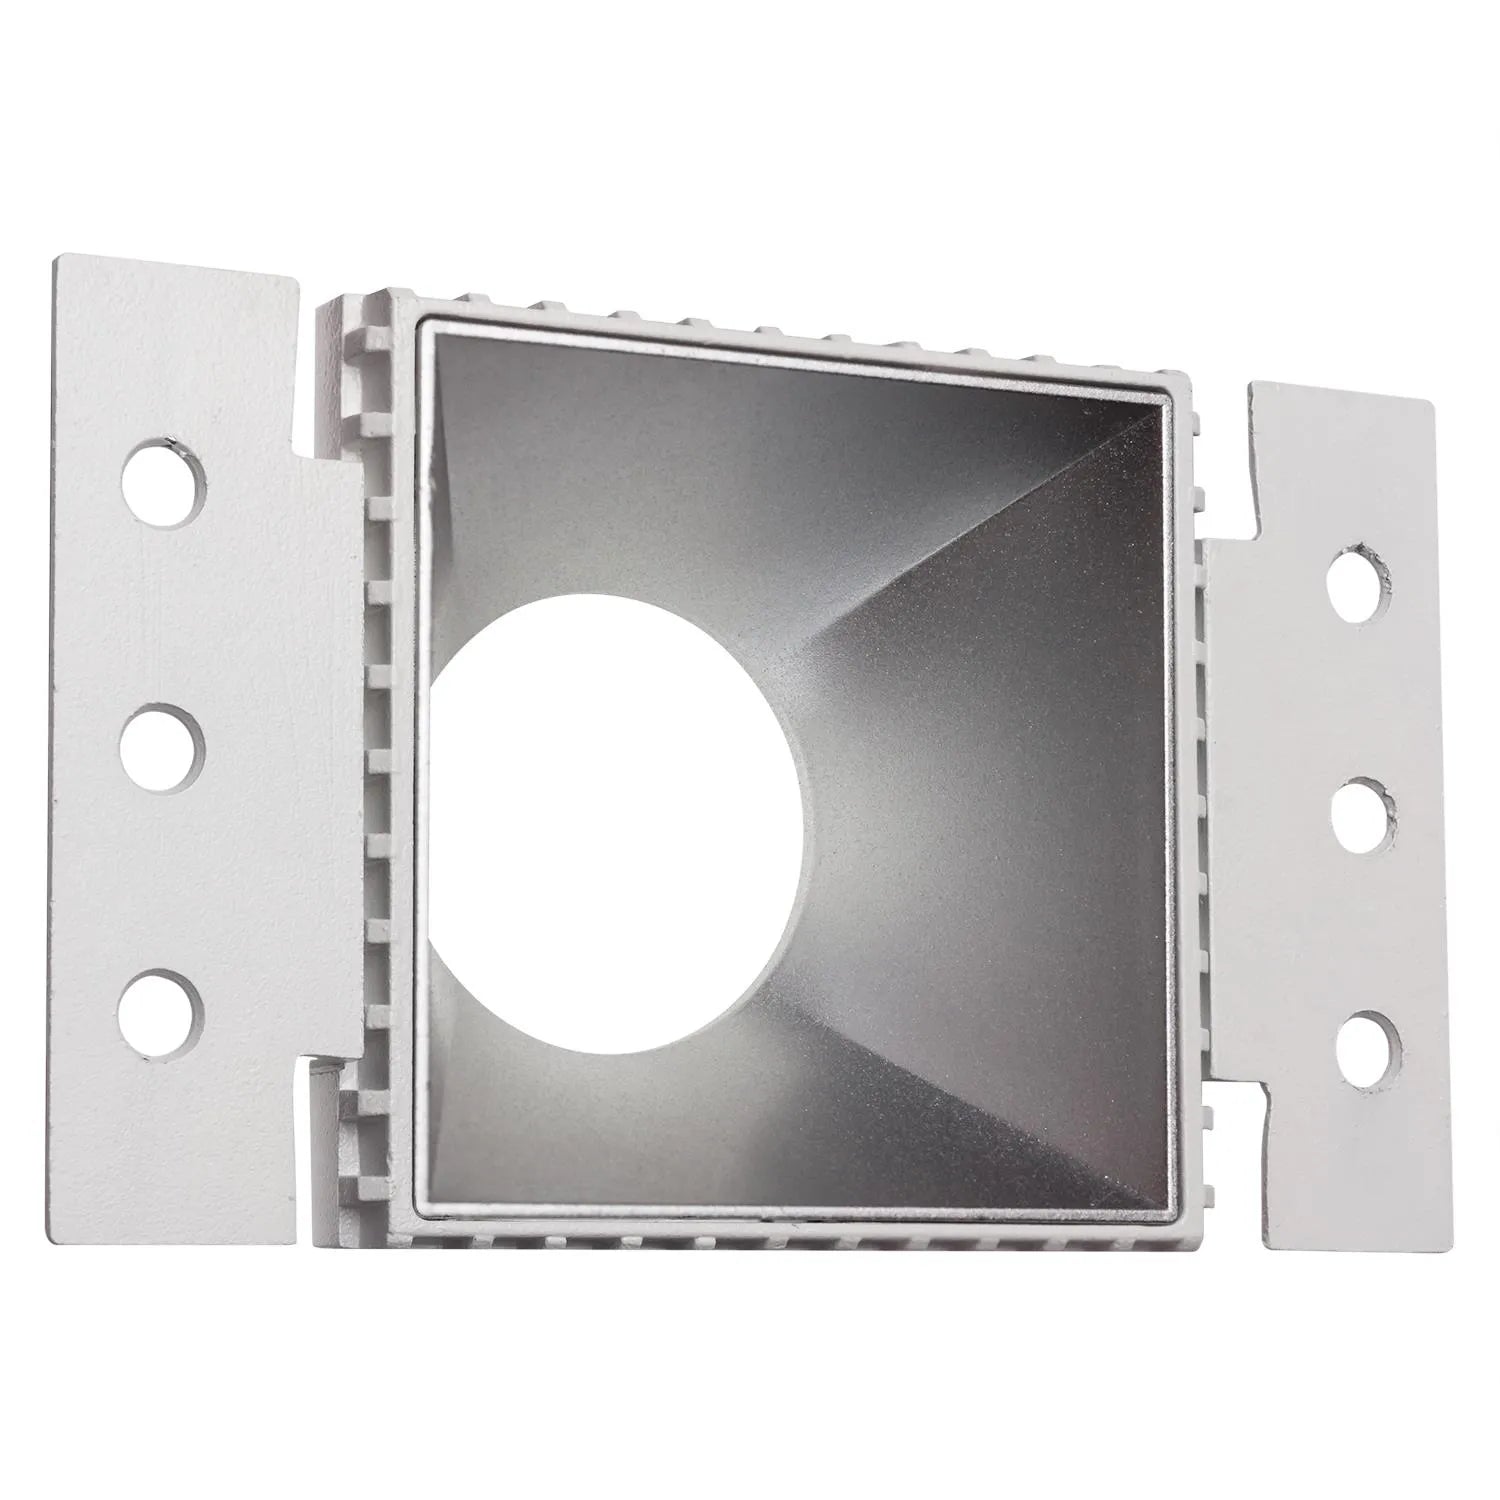 Westgate LRD-TL-10W-27K-4S-HZ LED 4" Round Architectural Trimless Recessed Light Residential Lighting - Matte Silver